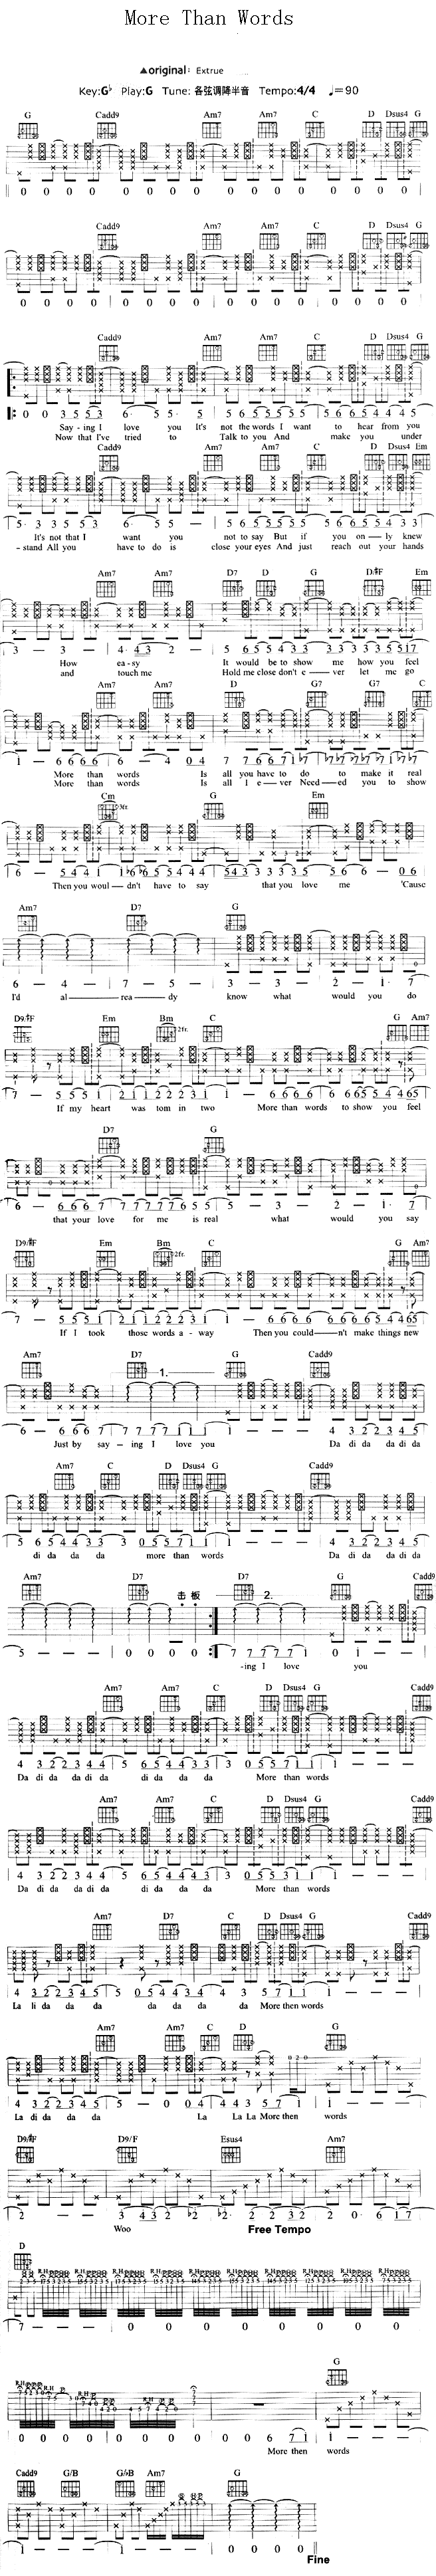 More Than Words by Extreme Guitar Sheet Music Free